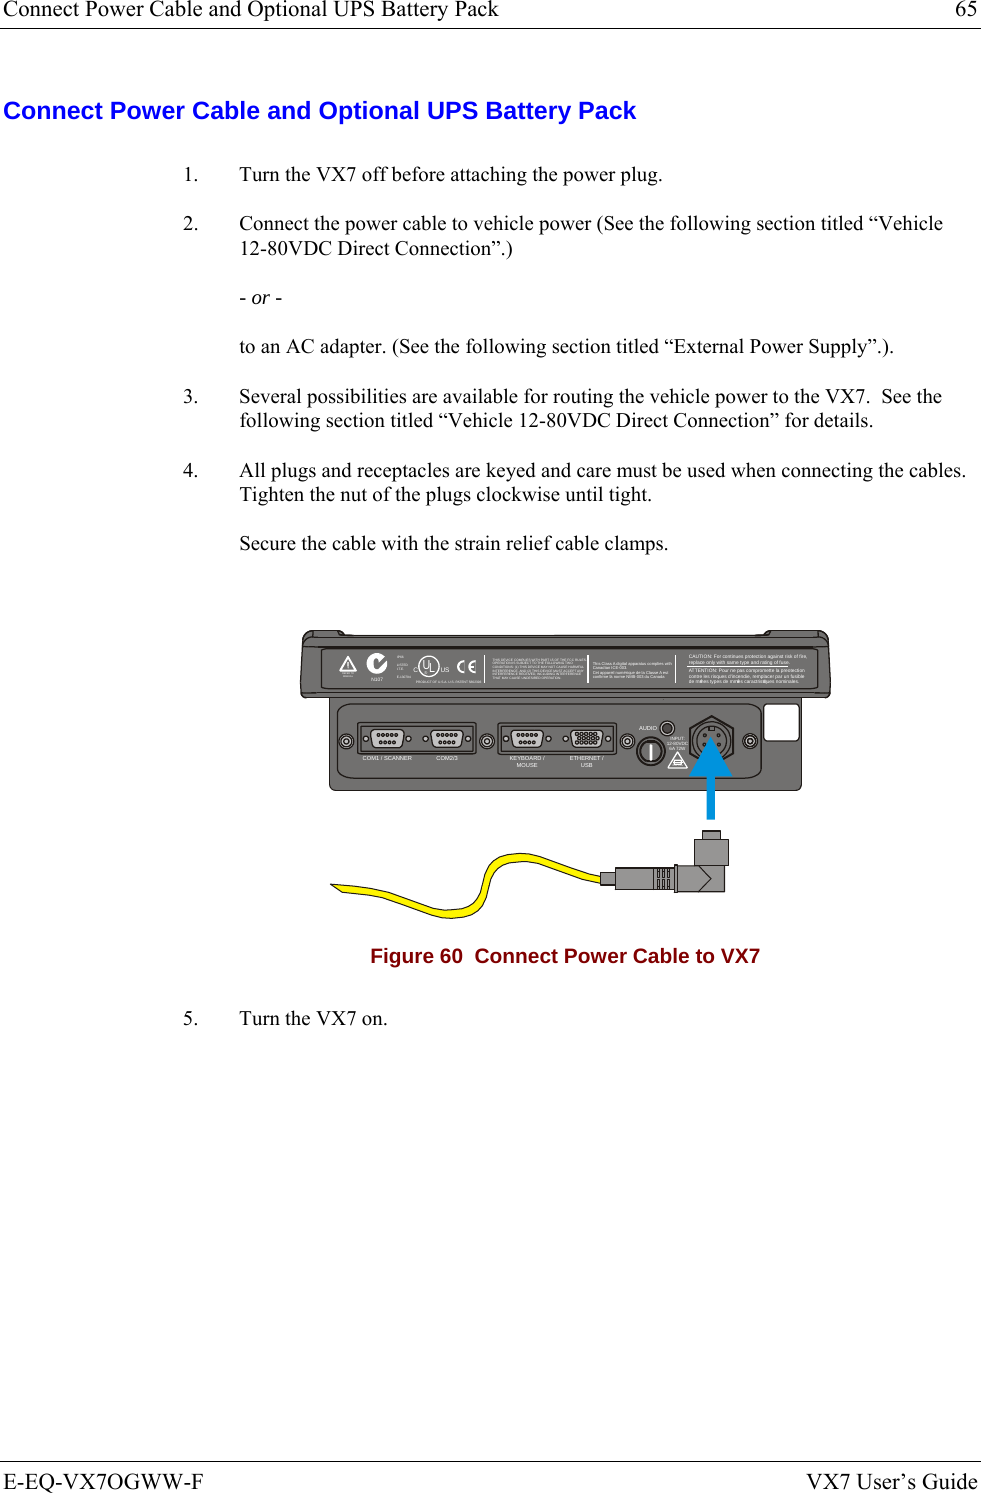 Connect Power Cable and Optional UPS Battery Pack  65 E-EQ-VX7OGWW-F  VX7 User’s Guide Connect Power Cable and Optional UPS Battery Pack 1.  Turn the VX7 off before attaching the power plug. 2.  Connect the power cable to vehicle power (See the following section titled “Vehicle 12-80VDC Direct Connection”.) - or - to an AC adapter. (See the following section titled “External Power Supply”.). 3.  Several possibilities are available for routing the vehicle power to the VX7.  See the following section titled “Vehicle 12-80VDC Direct Connection” for details. 4.  All plugs and receptacles are keyed and care must be used when connecting the cables. Tighten the nut of the plugs clockwise until tight. Secure the cable with the strain relief cable clamps.  T10A, 125VINPUT:12-80VDC6A 72WAUDIOETHERNET /USBKEYBOARD /MOUSECOM2/3COM1 / SCANNERN107REFER TOMANUALIP66LISTEDI.T.E.E-130794CPRODUCT OF U.S.A. U.S. PATENT 5862393USUL®THIS DEVICE COMPLIES WITH PART 15 OF THE FCC RULES.OPERATION IS SUBJECT  TO THE FOLLOWING TWOCONDITIONS: (1) THIS DEVICE MAY NOT CAUSE HARMFULINTERFERENCE , AND (2) THIS  DEVICE MUST ACCE PT ANYINTERFERENCE RECEIVED, INCLUDING INTERFERENCETHAT MAY CAUSE UNDESIRED OPERATION.This Class A digital apparatus complies withCanadian ICE-003.Cet appareil num de la Classe A estconfirme l ériqueorme NMB-003 du Canadaà nCAUTION: For continues protection against risk of fire, replace only with same type and rating of fuse.ATTENTION: Pour ne pas compromette la preotectioncontre les risques d&apos;incendie, remplacer par un fusiblede mmes types de mmes caractristques nominales.êêé Figure 60  Connect Power Cable to VX7 5.  Turn the VX7 on.   